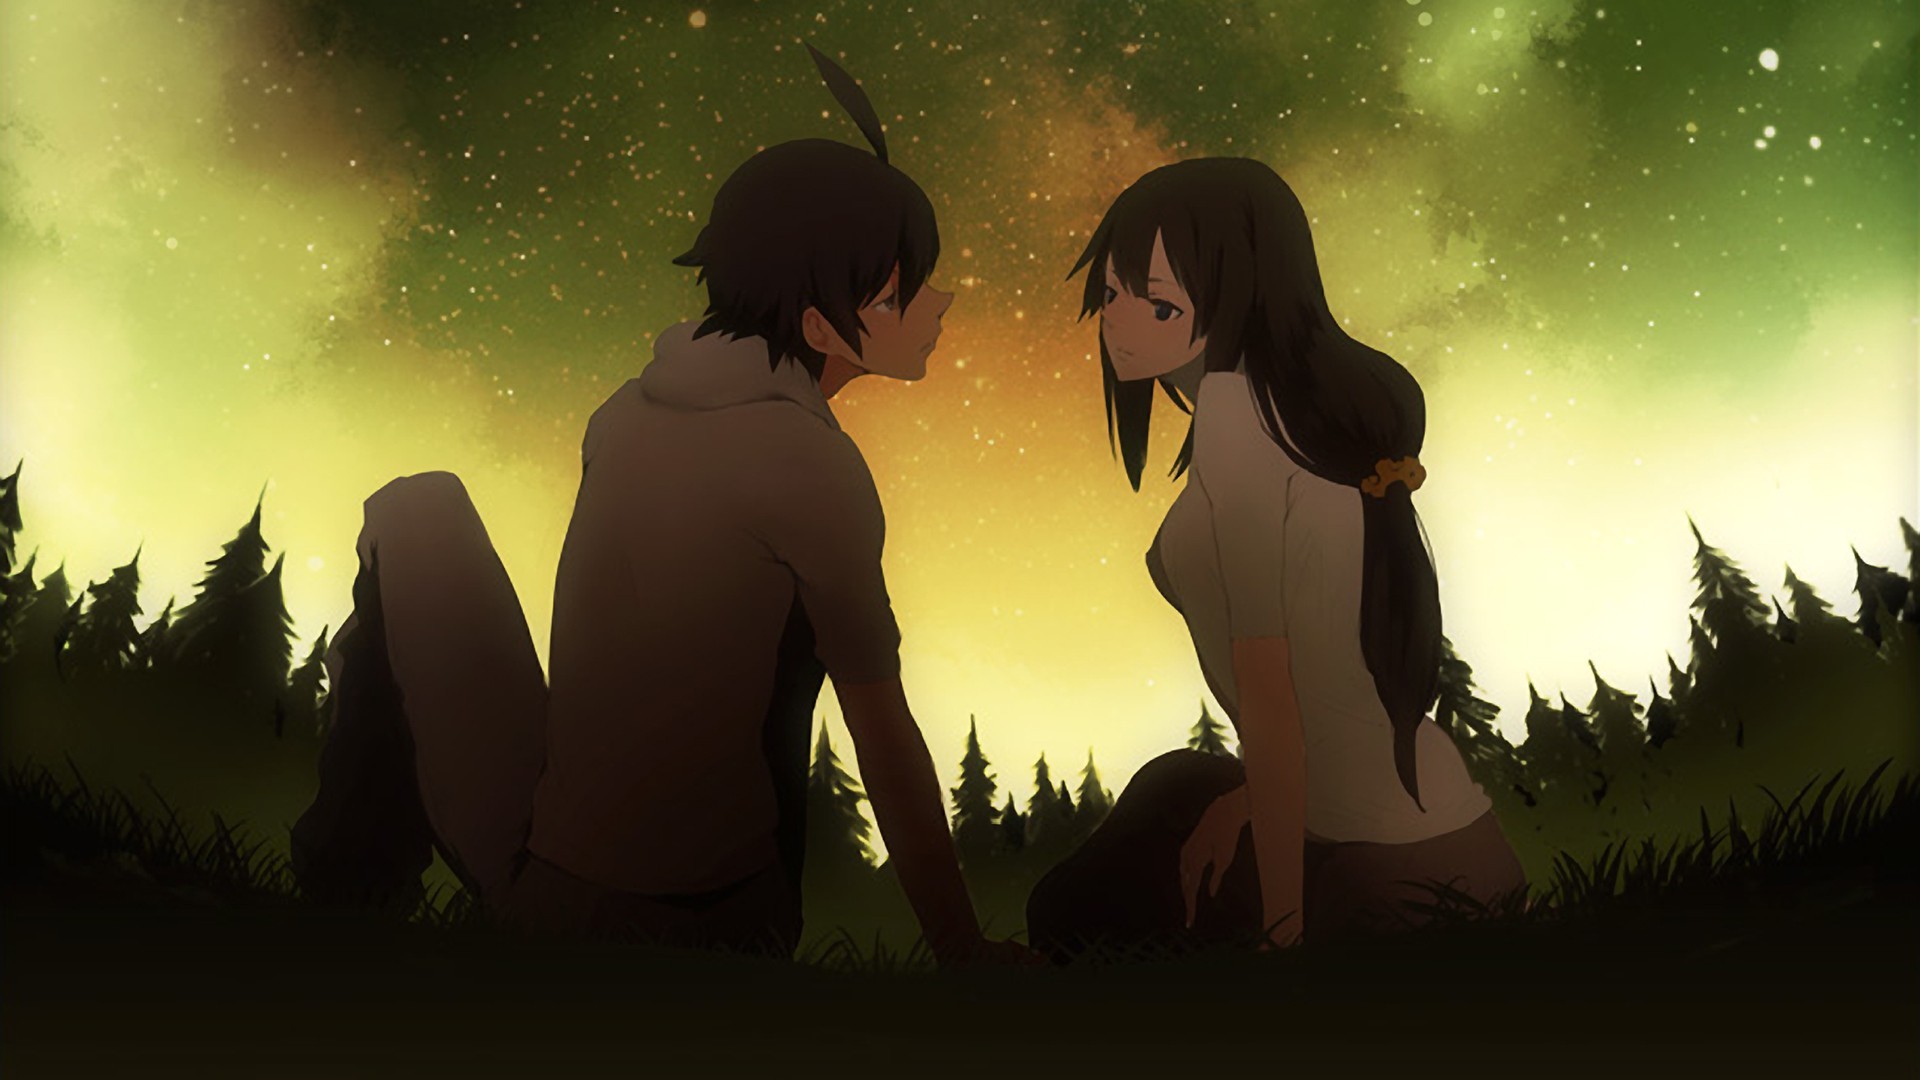 Cute Anime Couple Hd Wallpapers - Anime Couple Image Download , HD Wallpaper & Backgrounds